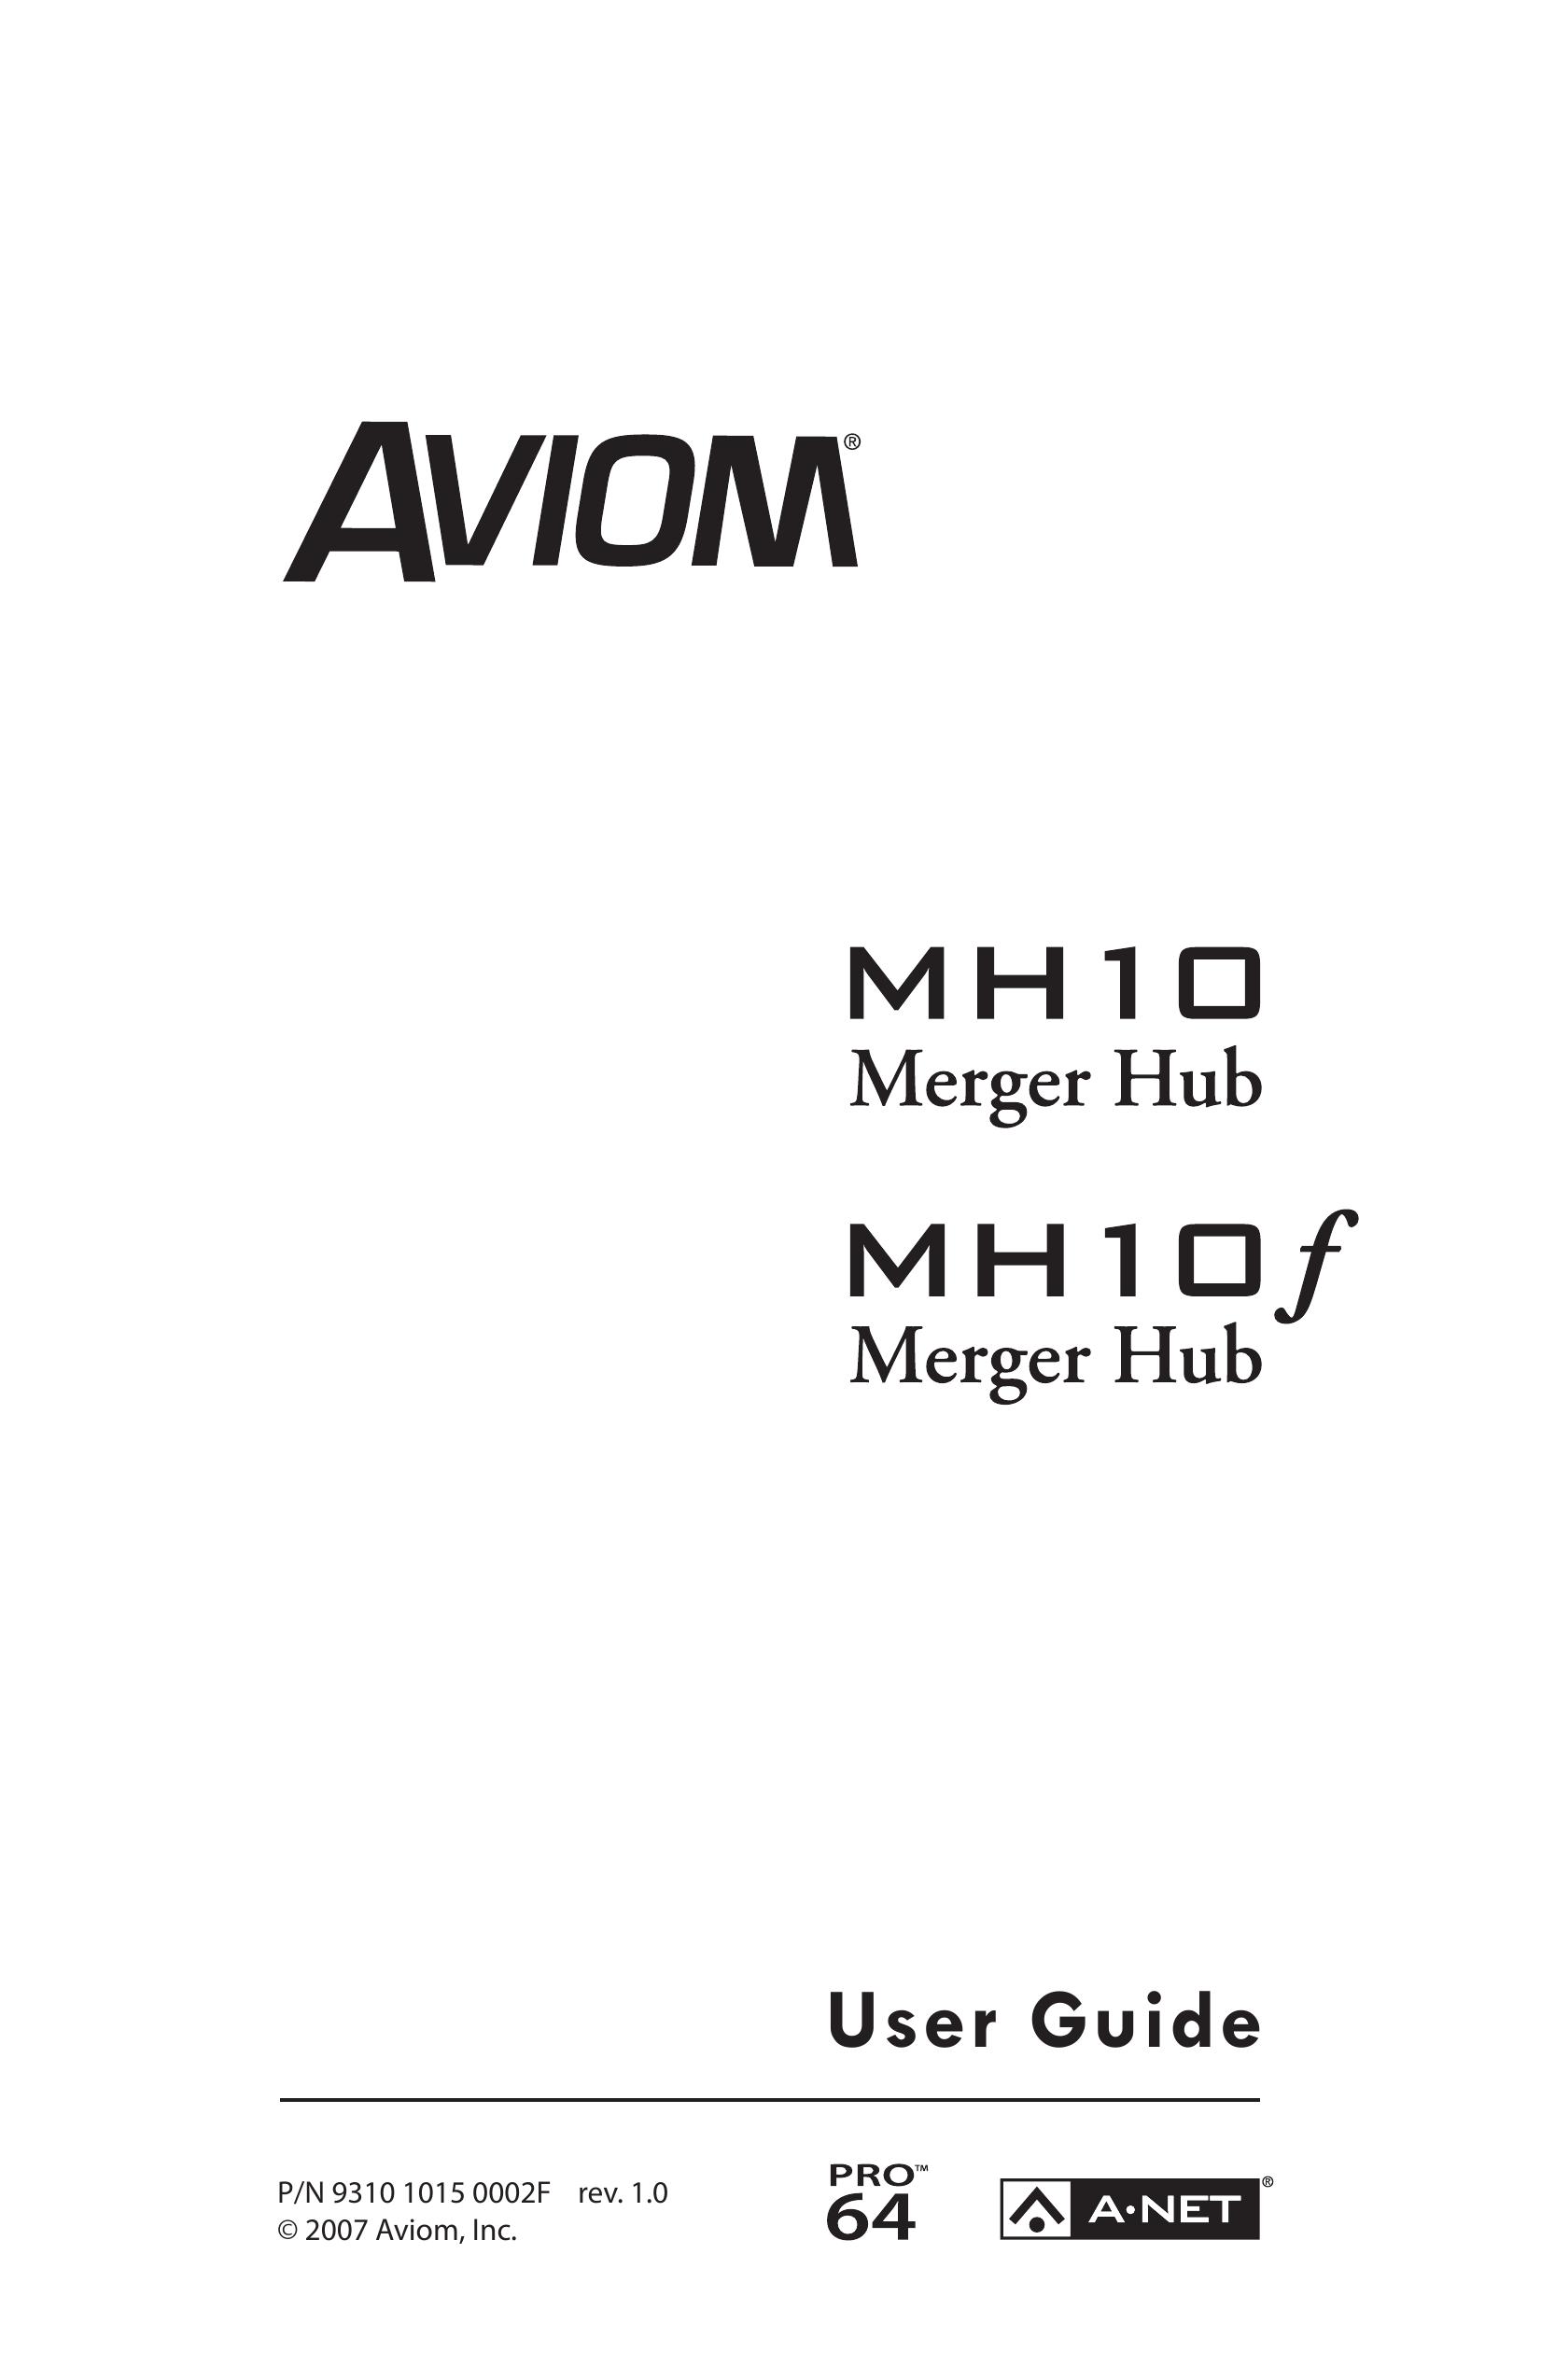 Aviom MH10f Musical Instrument User Manual (Page 1)